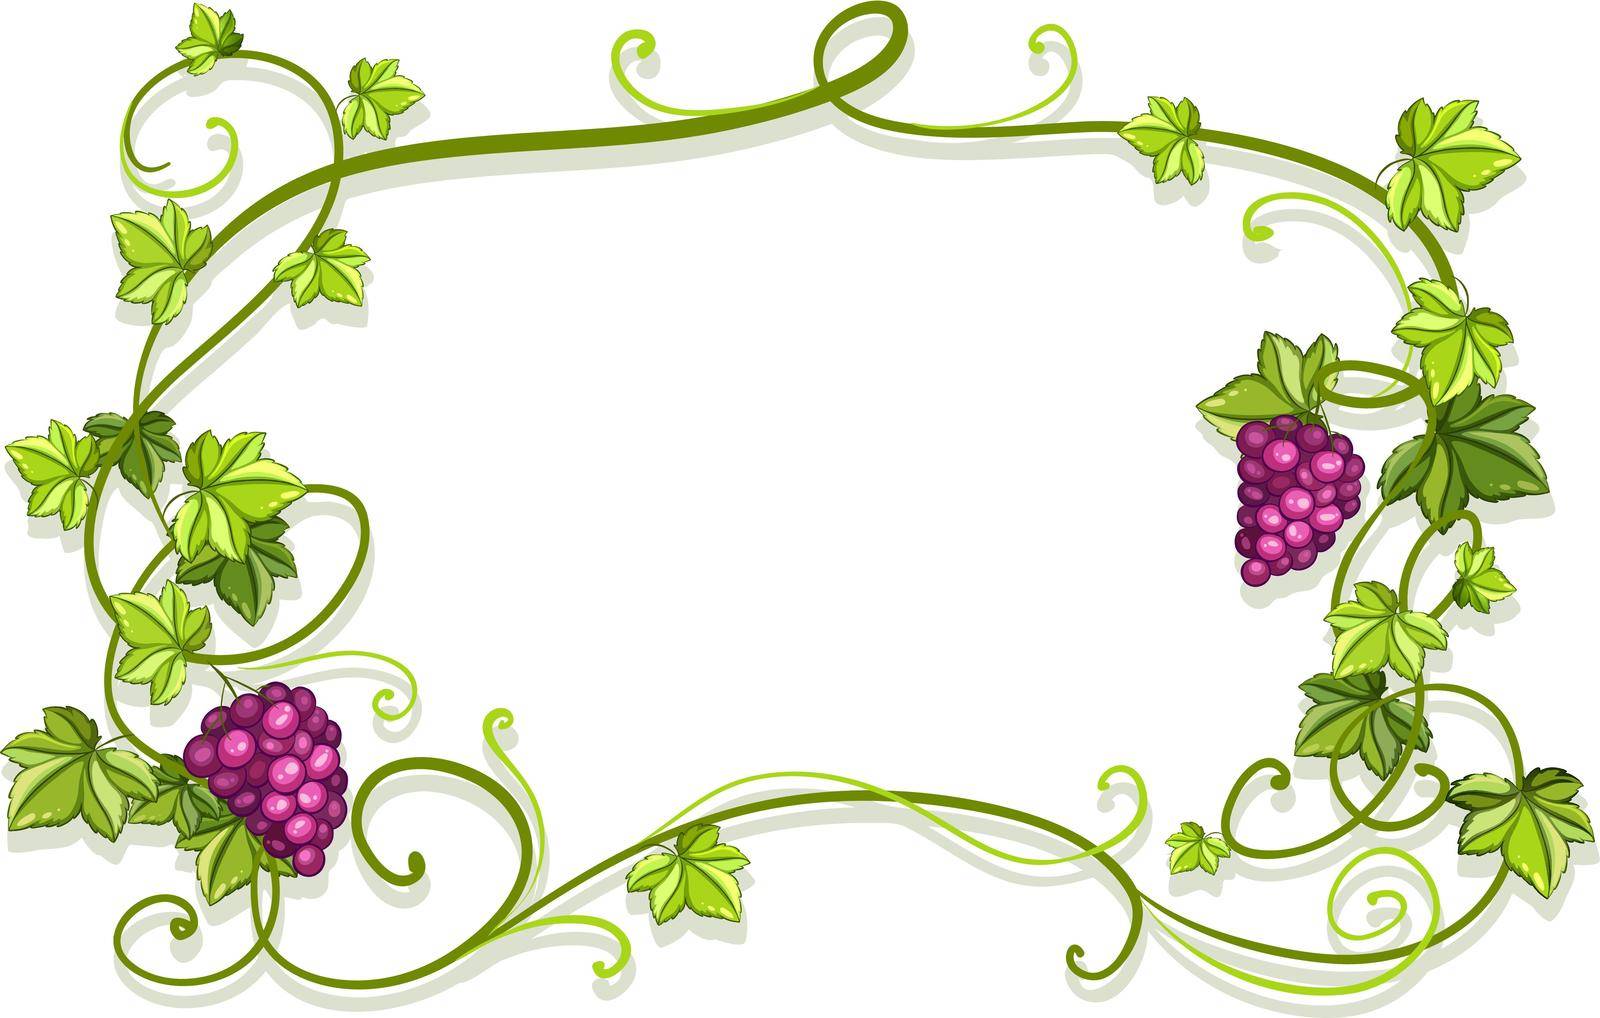 White card with plant and grapes frame